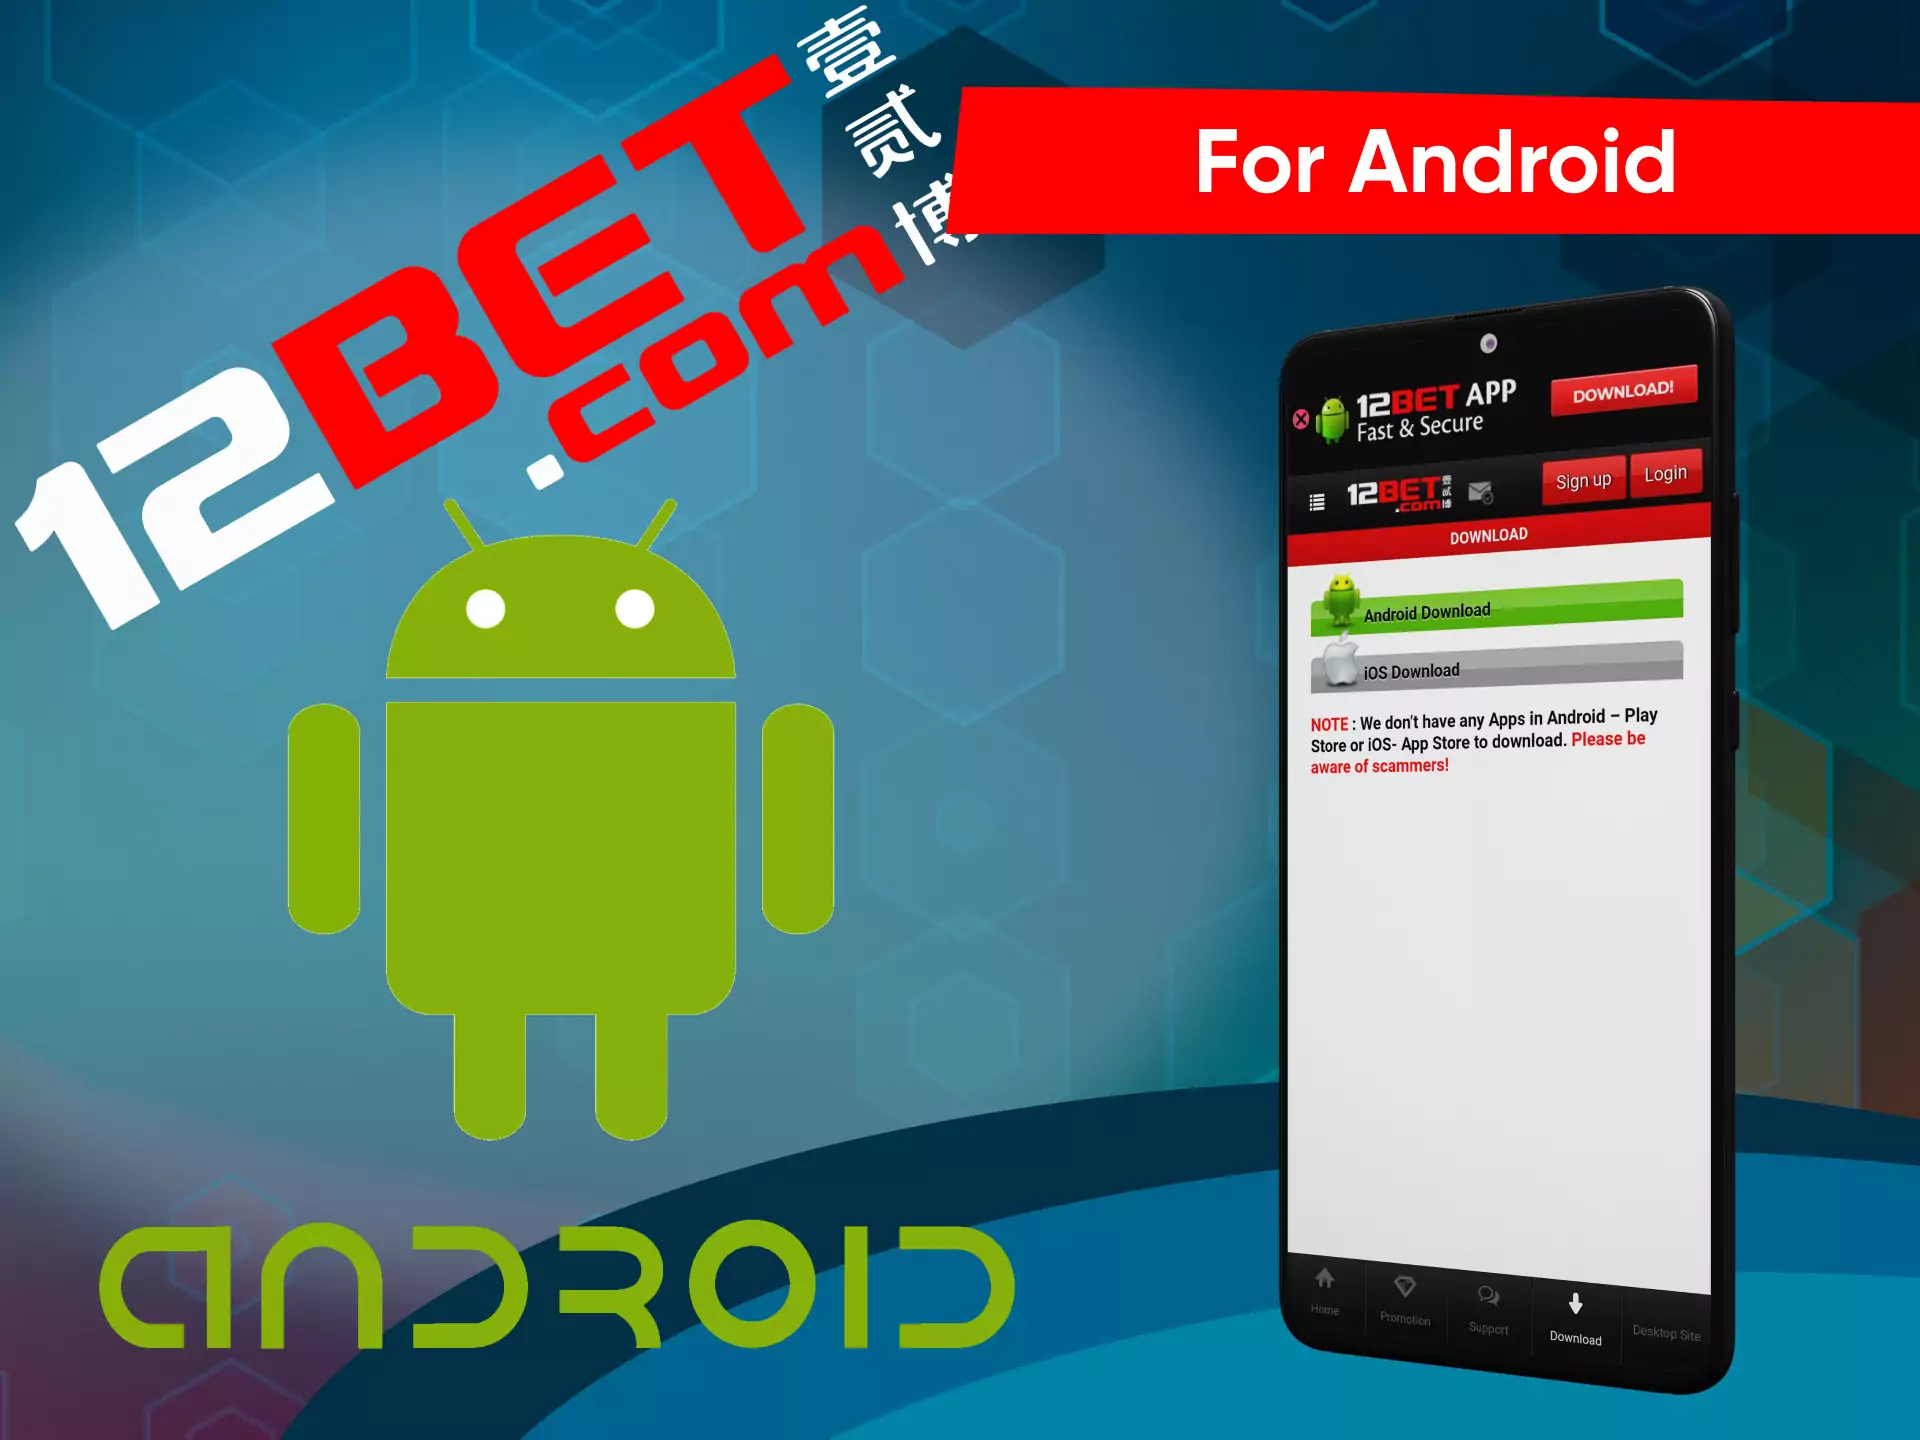 For betting from a smartphone, download the Android app of 12bet.